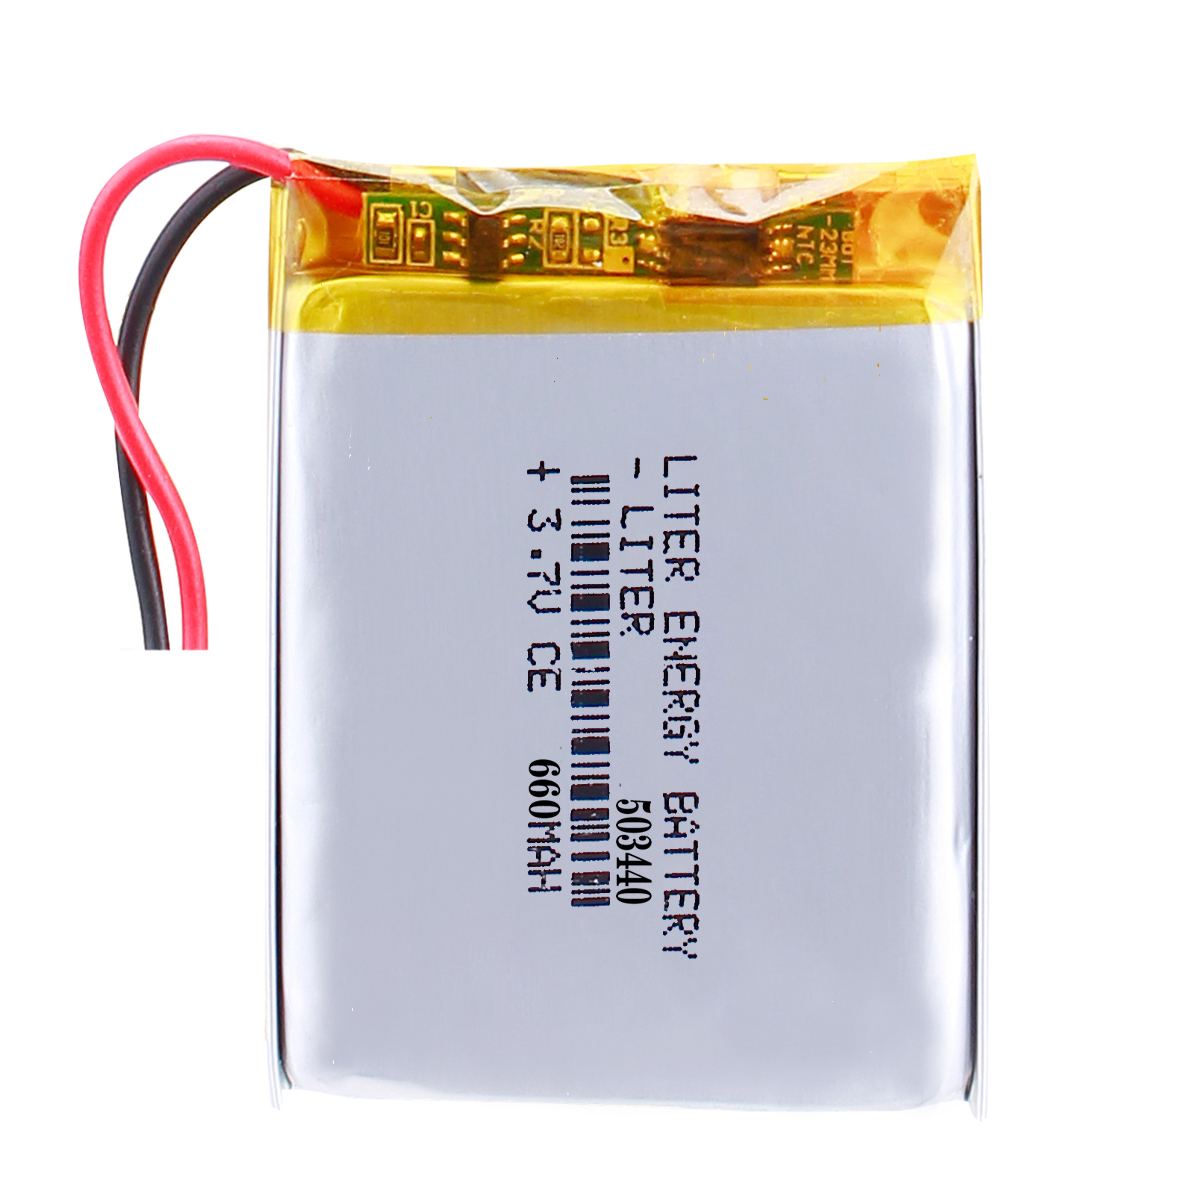 503440 660mAh 3.7V Rechargeable LiPo Battery with connector Molex 51021-0400